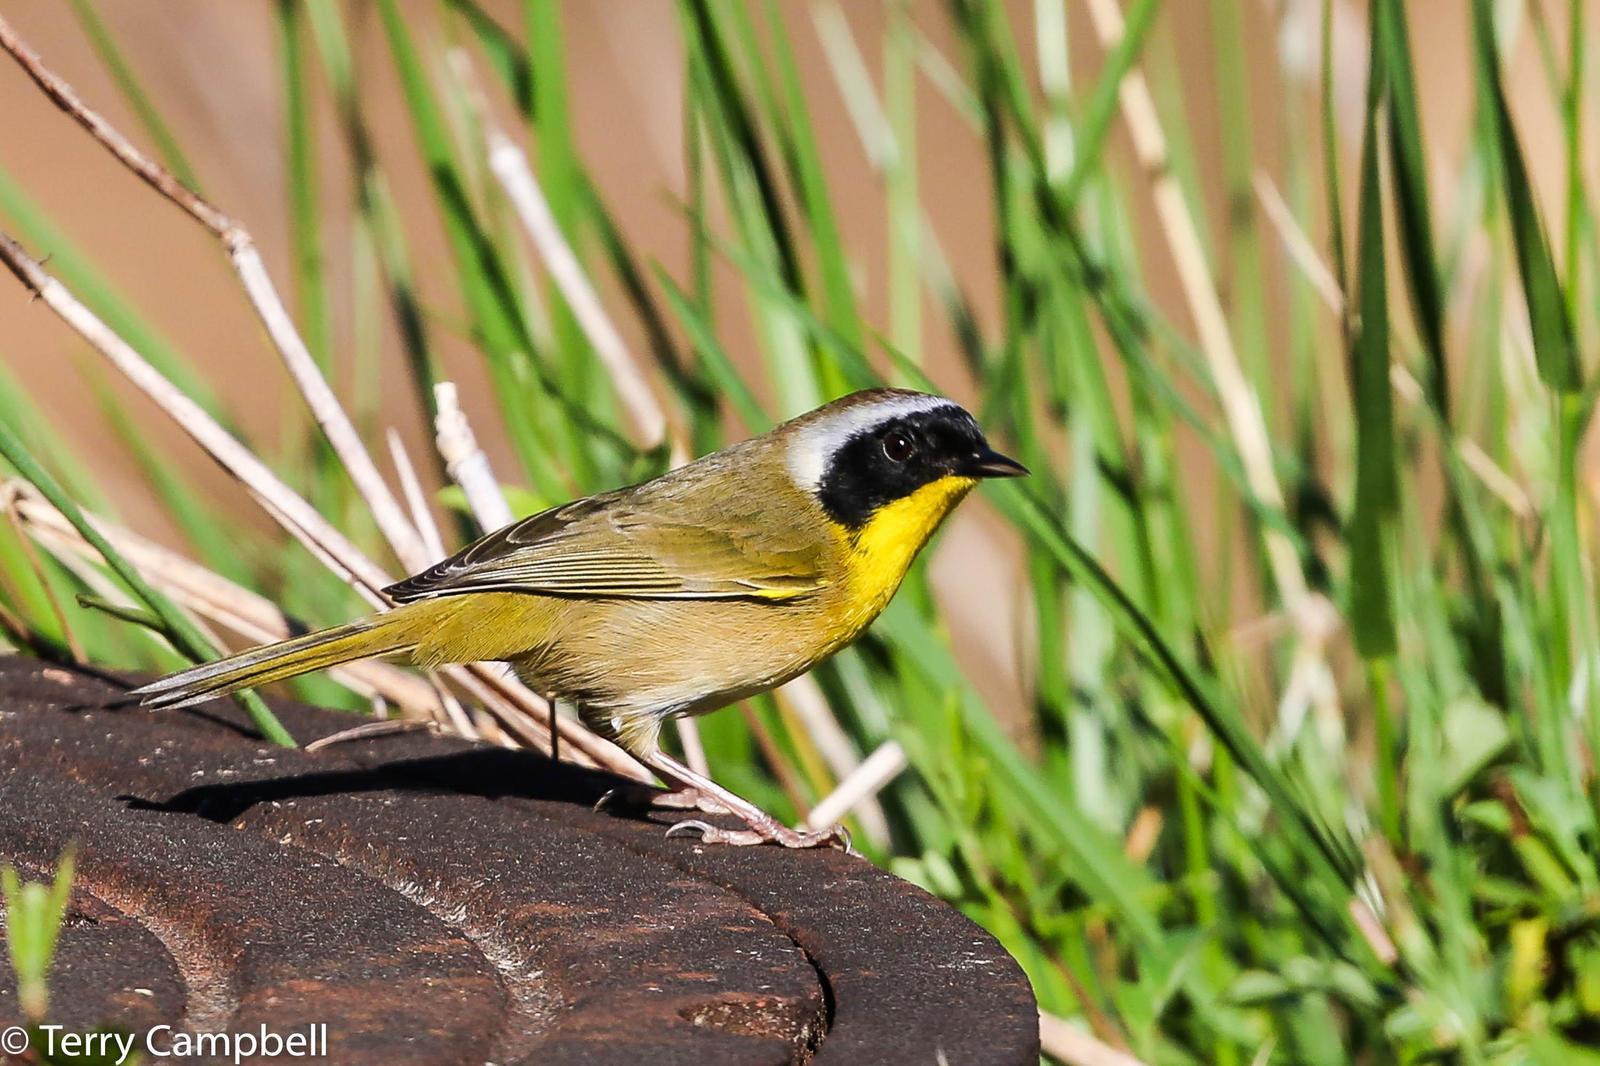 Common Yellowthroat Photo by Terry Campbell